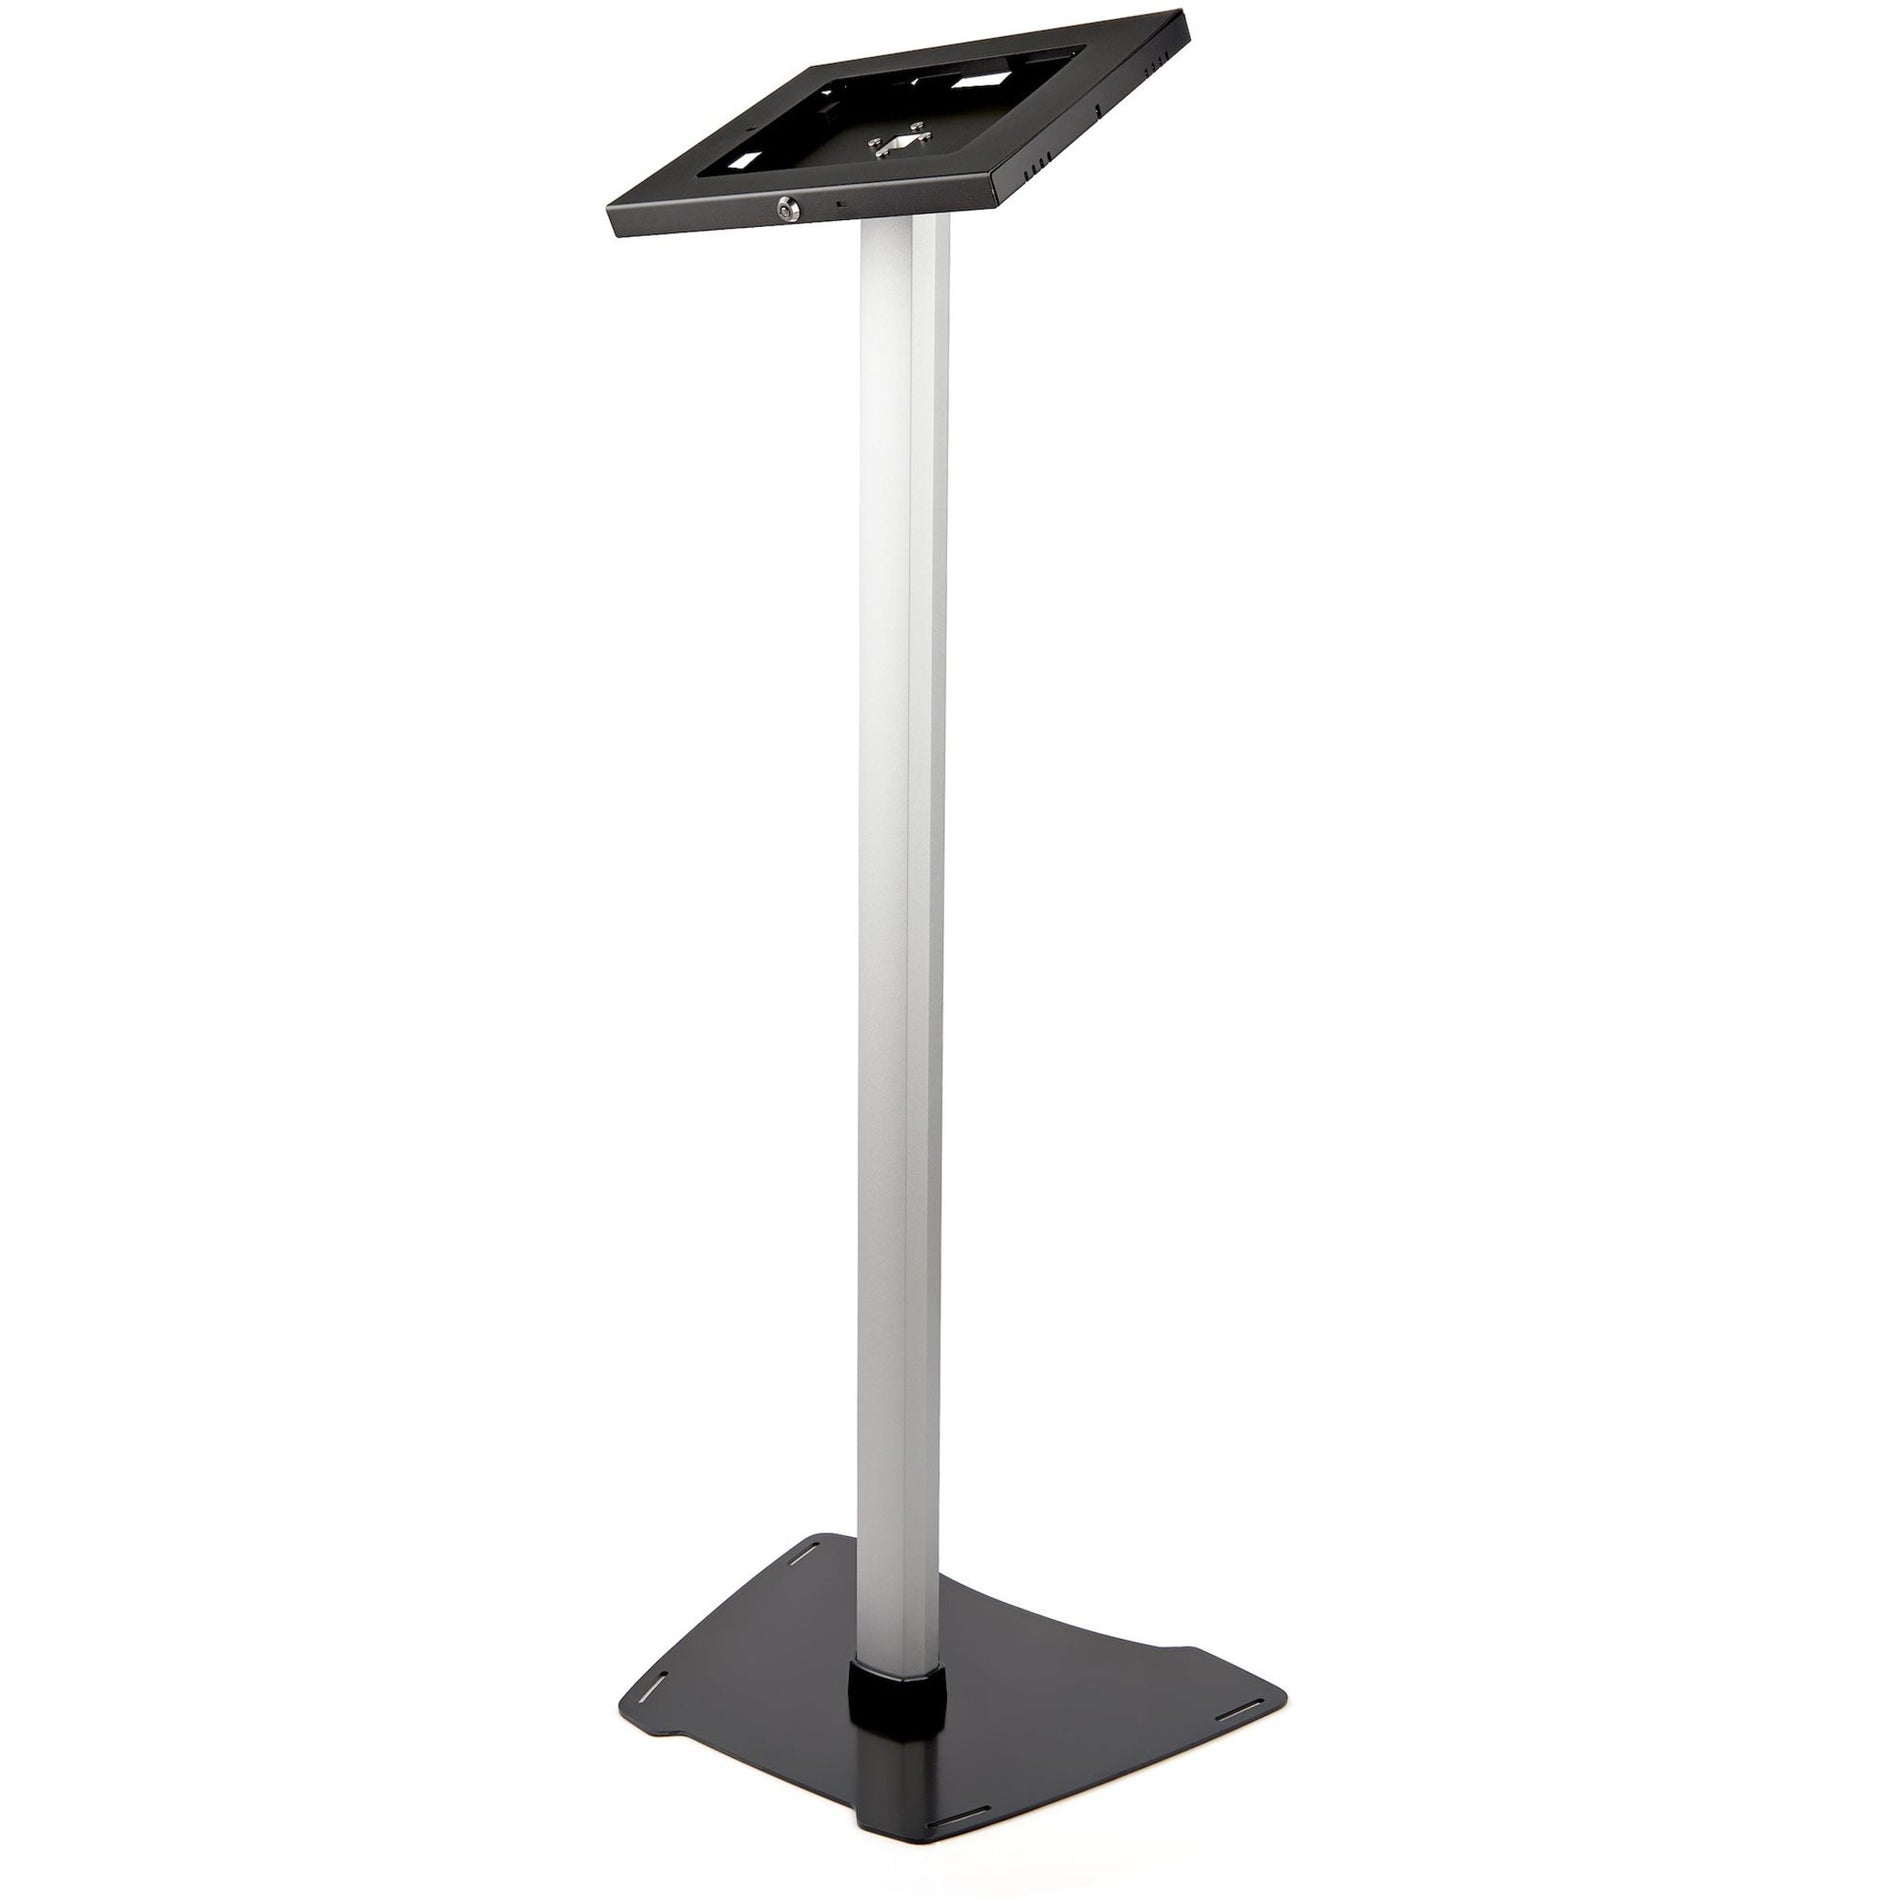 StarTech.com STNDTBLT1FS Secure Tablet Floor Stand - Anti-Theft, Adjustable Height, 9.7" Screen Support, TAA Compliant